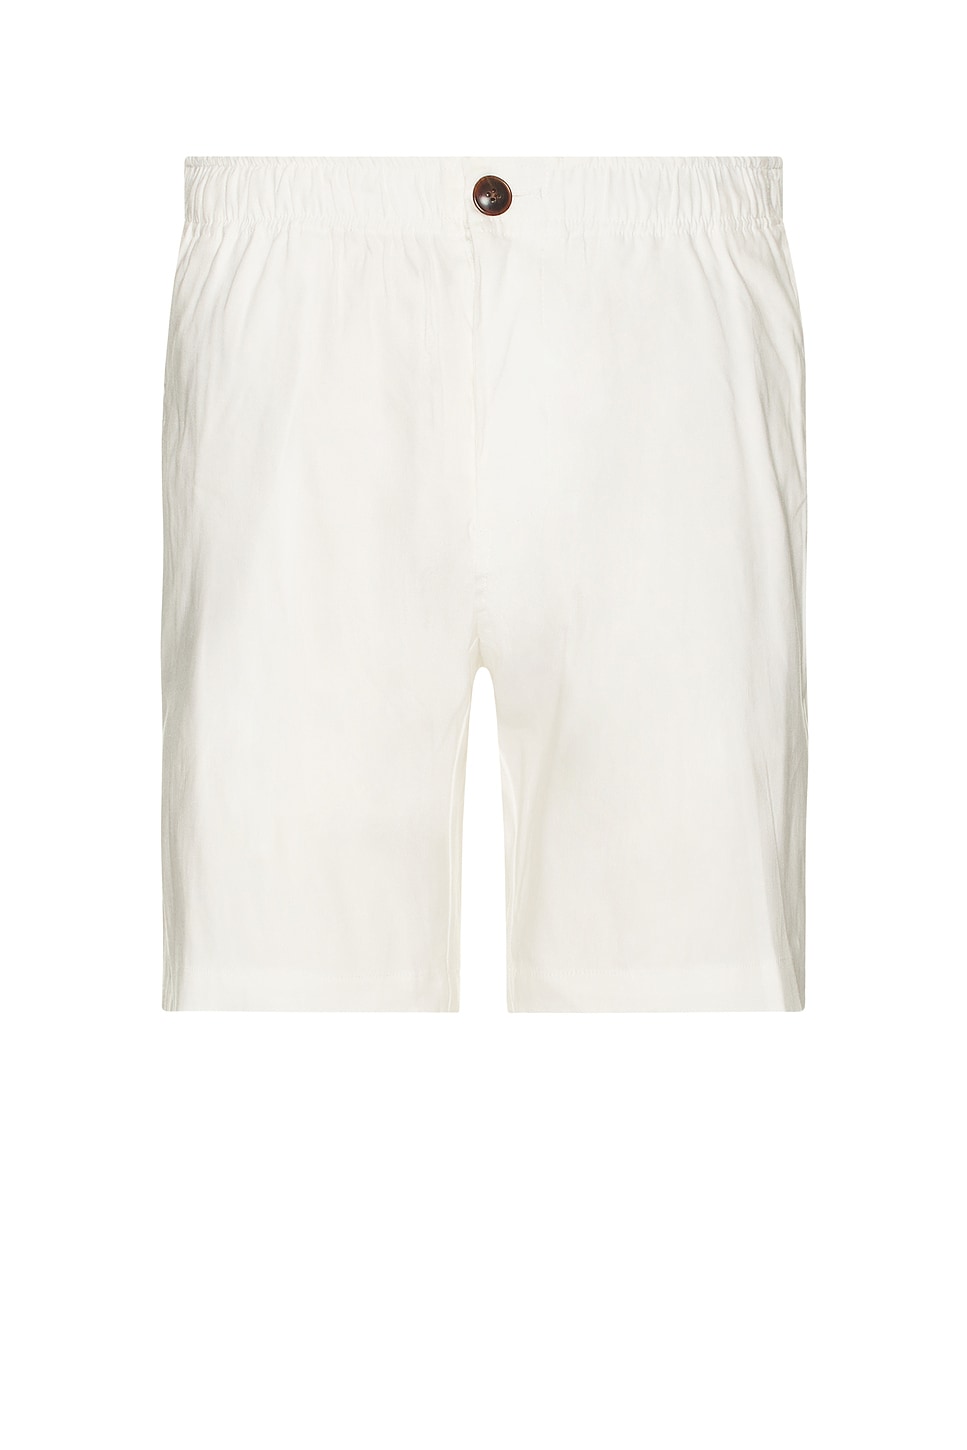 Image 1 of SATURDAYS NYC Ambrose Linen Short in Ivory